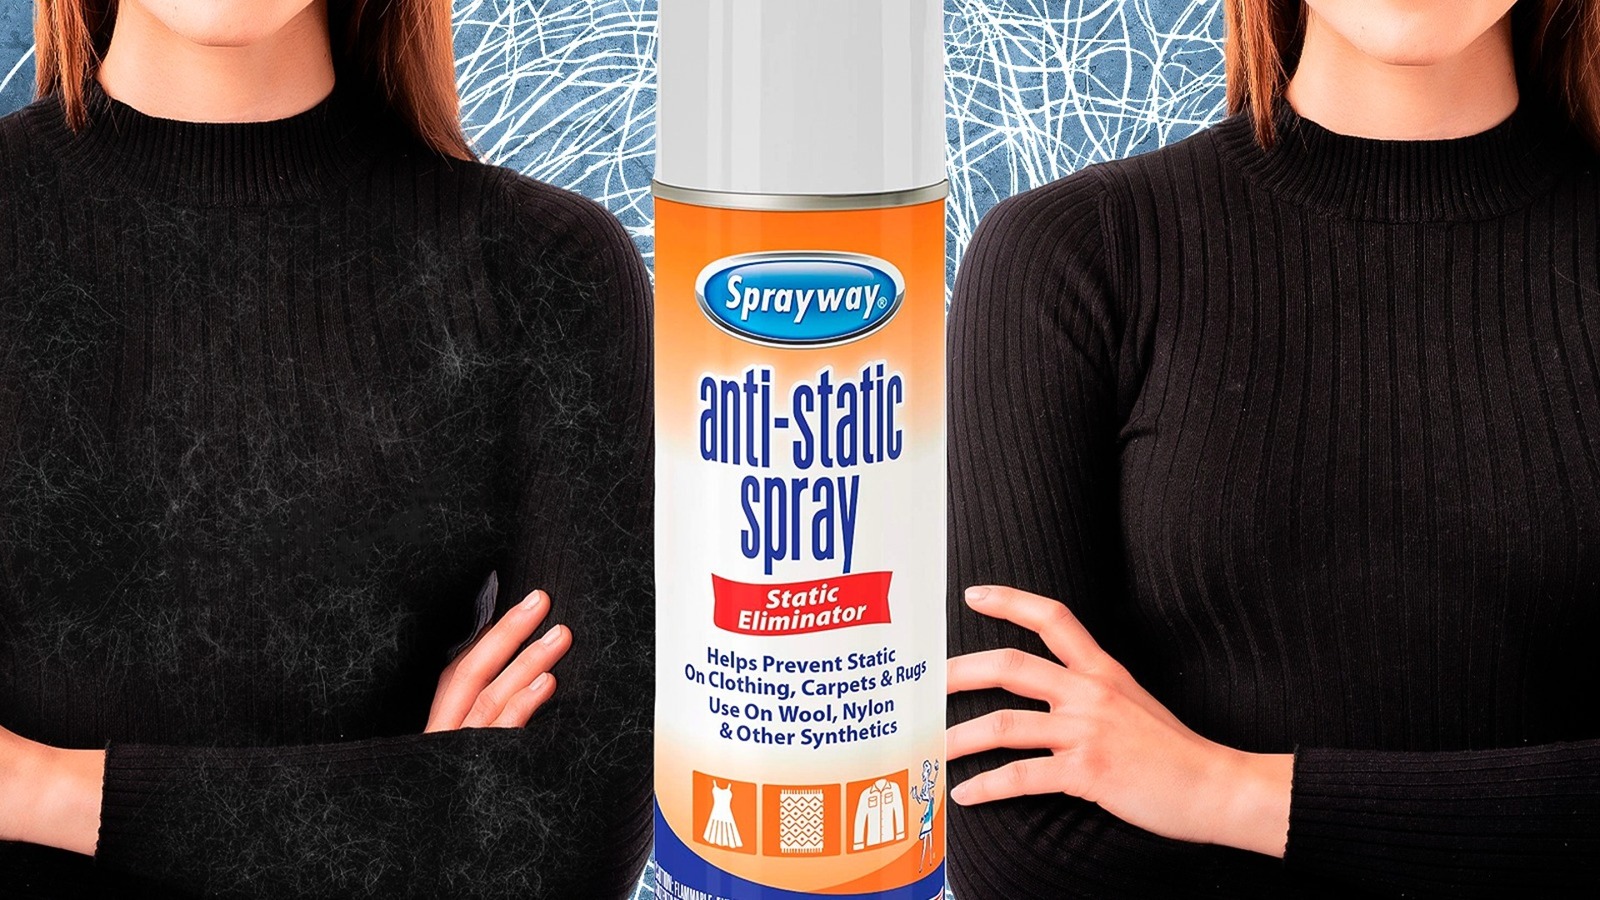 Can You Use Anti-Static Spray To Prevent Lint On Your Clothes?